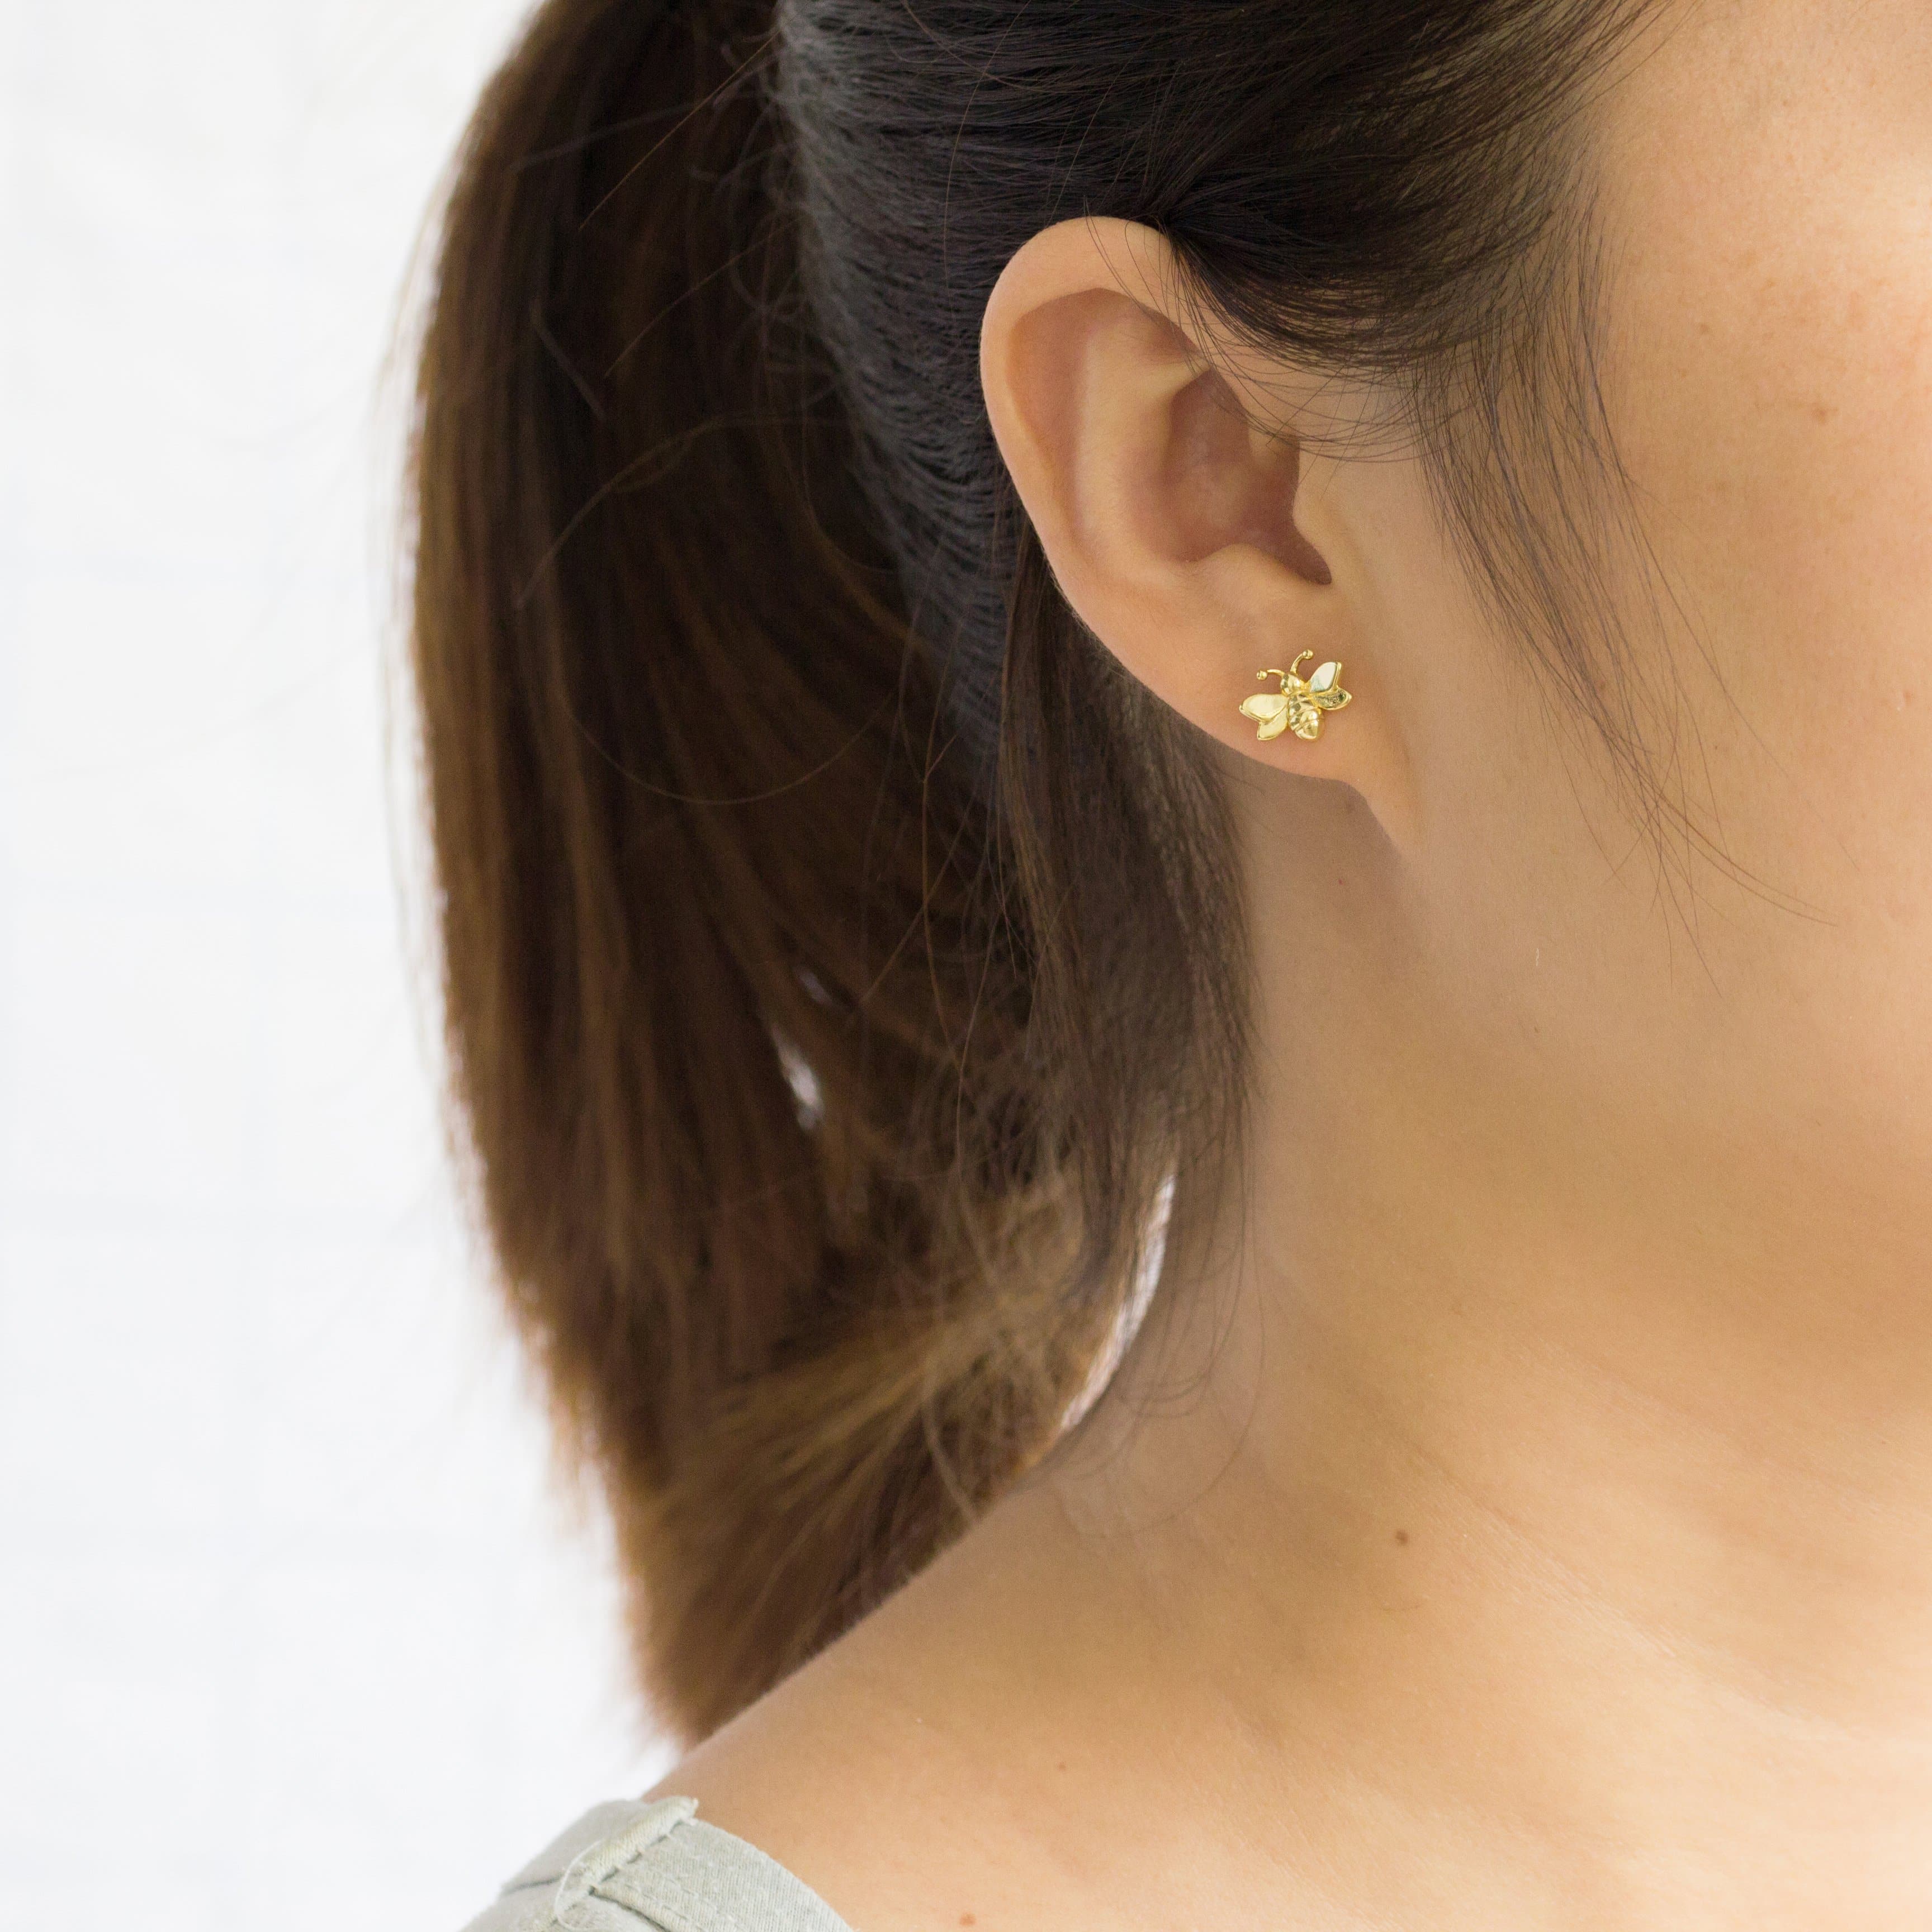 Gold Plated Bumble Bee Earrings